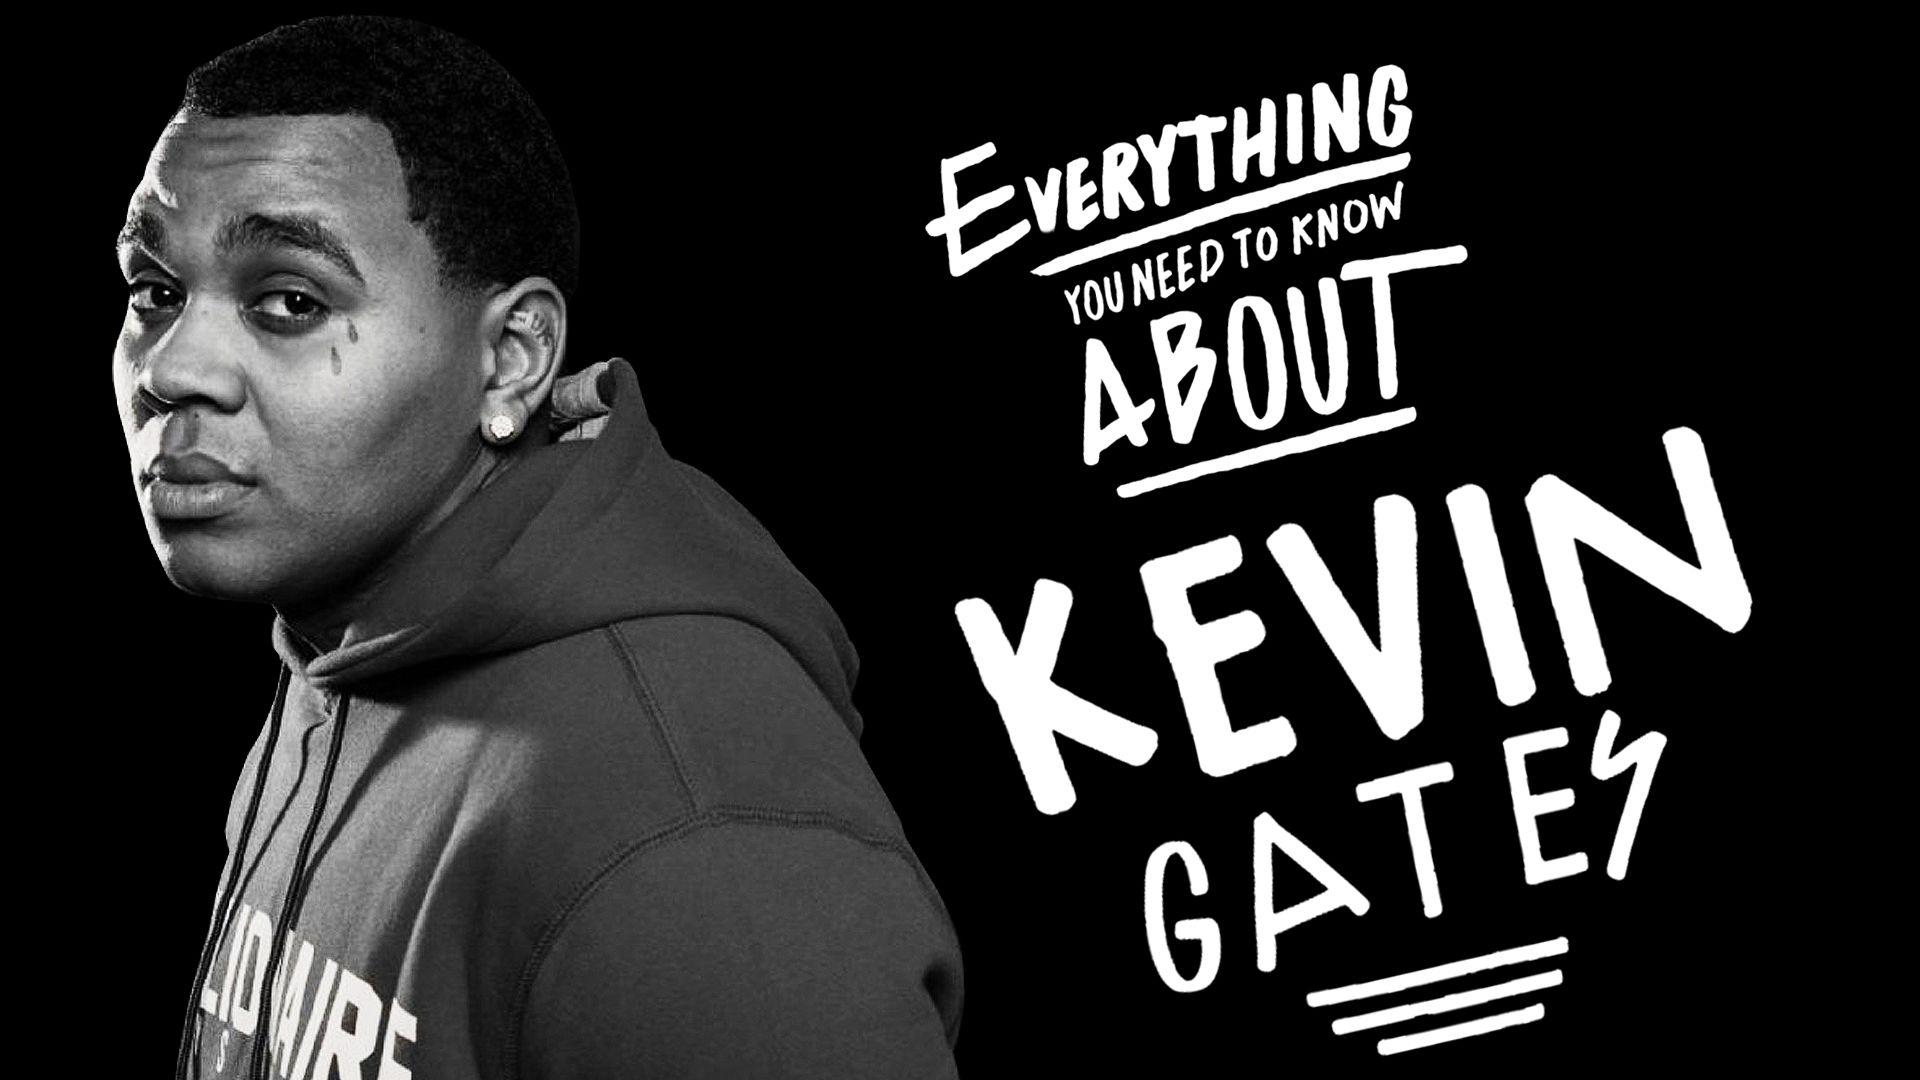 image about kevin gates. Beast mode, Music